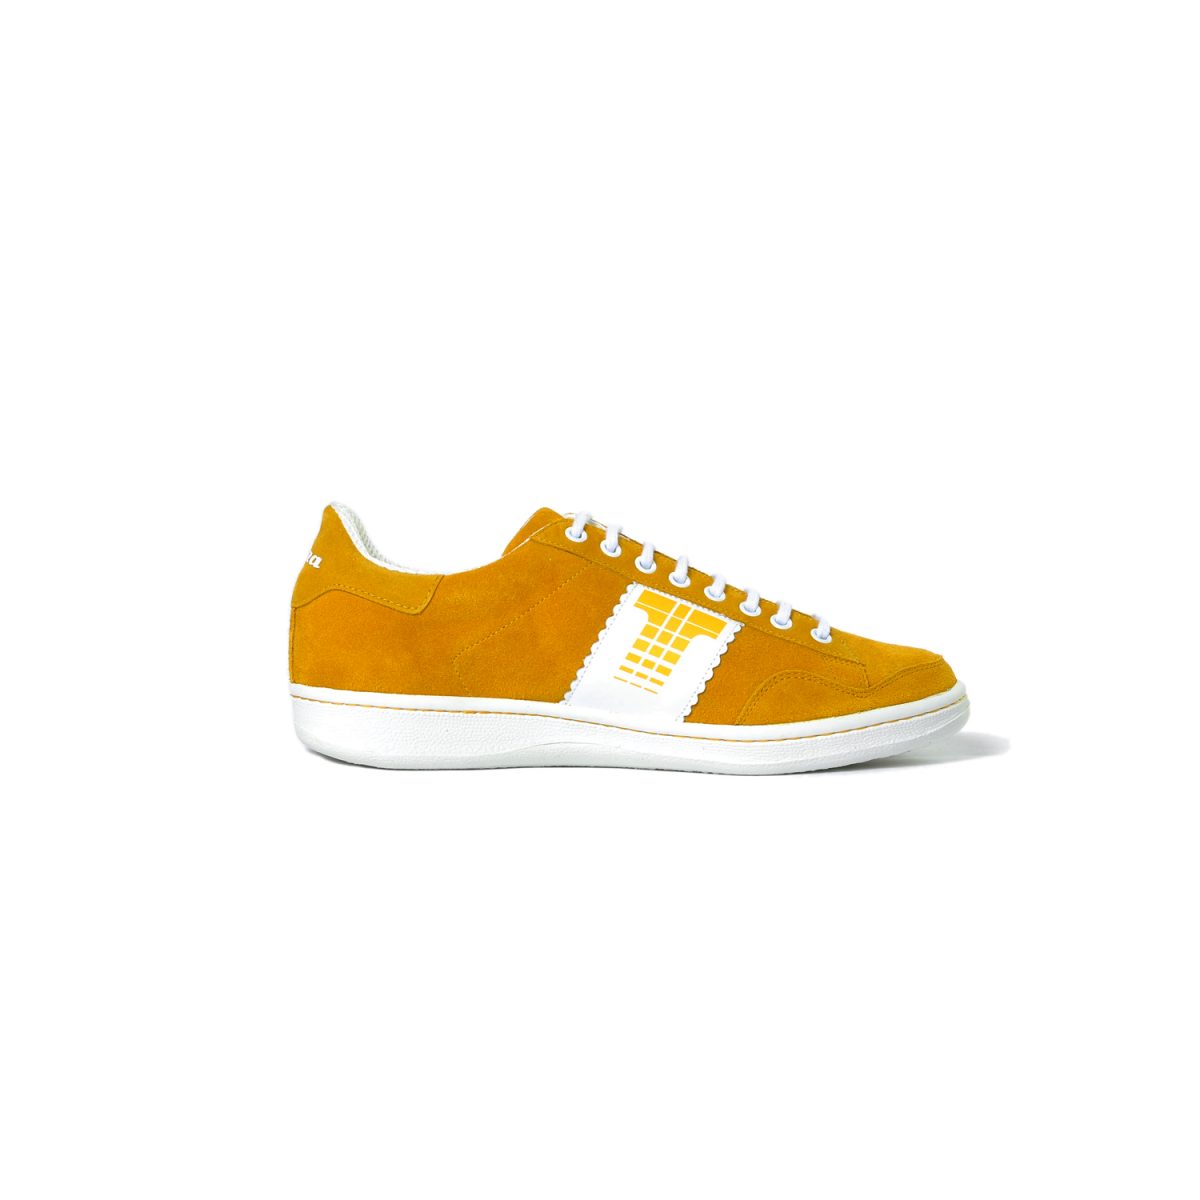 Tisza shoes - Derby - Yellow